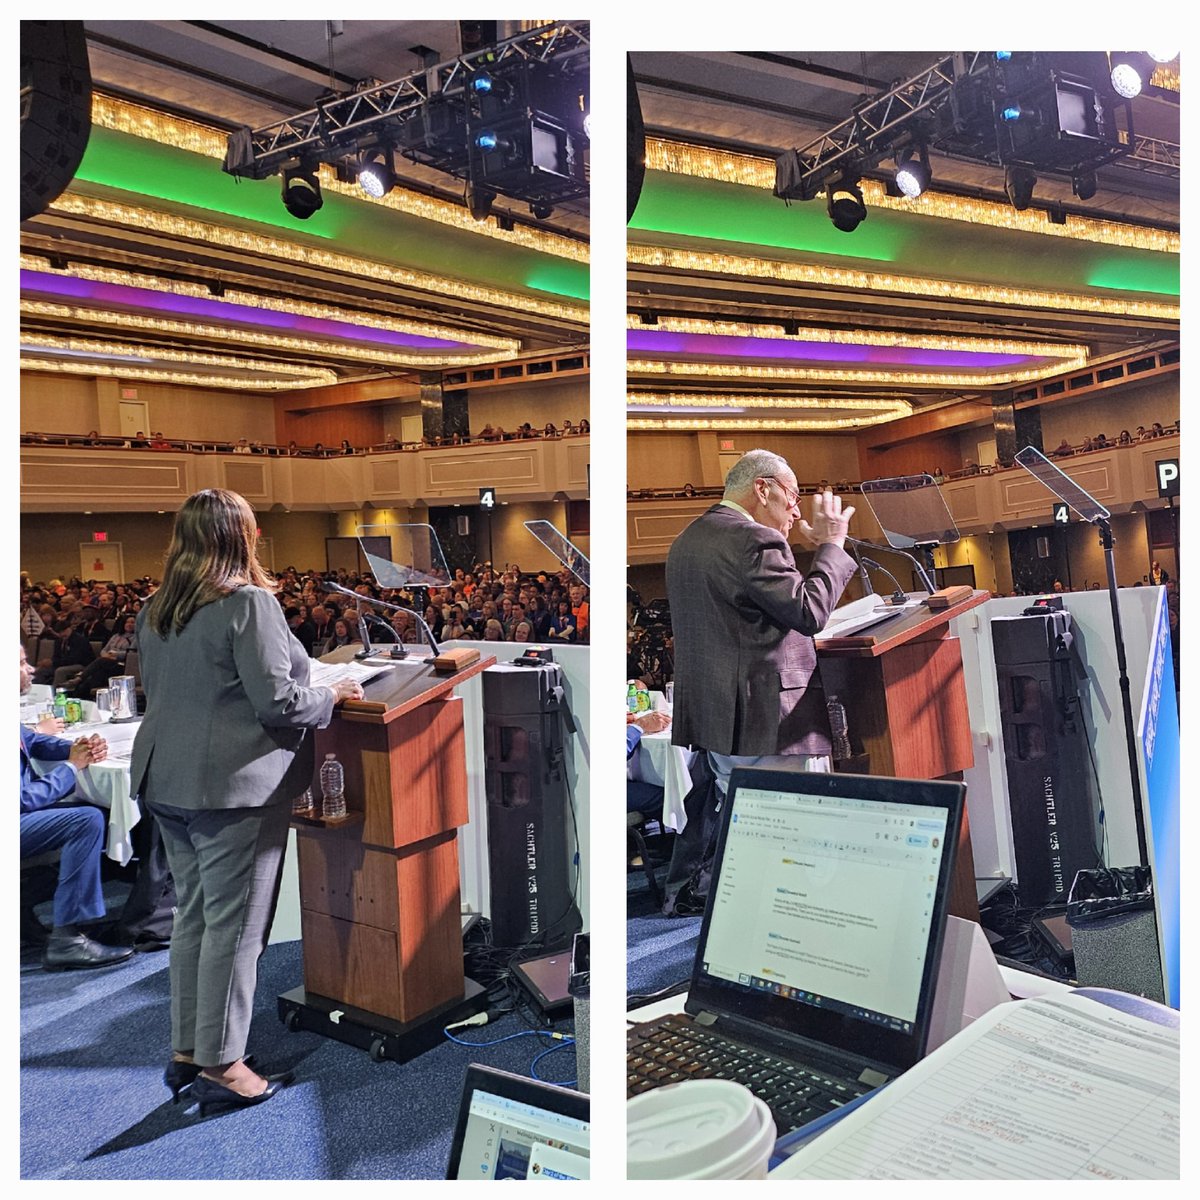 So cool to watch these two powerhouses speak and get multiple ovations today. @TishJames @SenSchumer #NYSUTRA